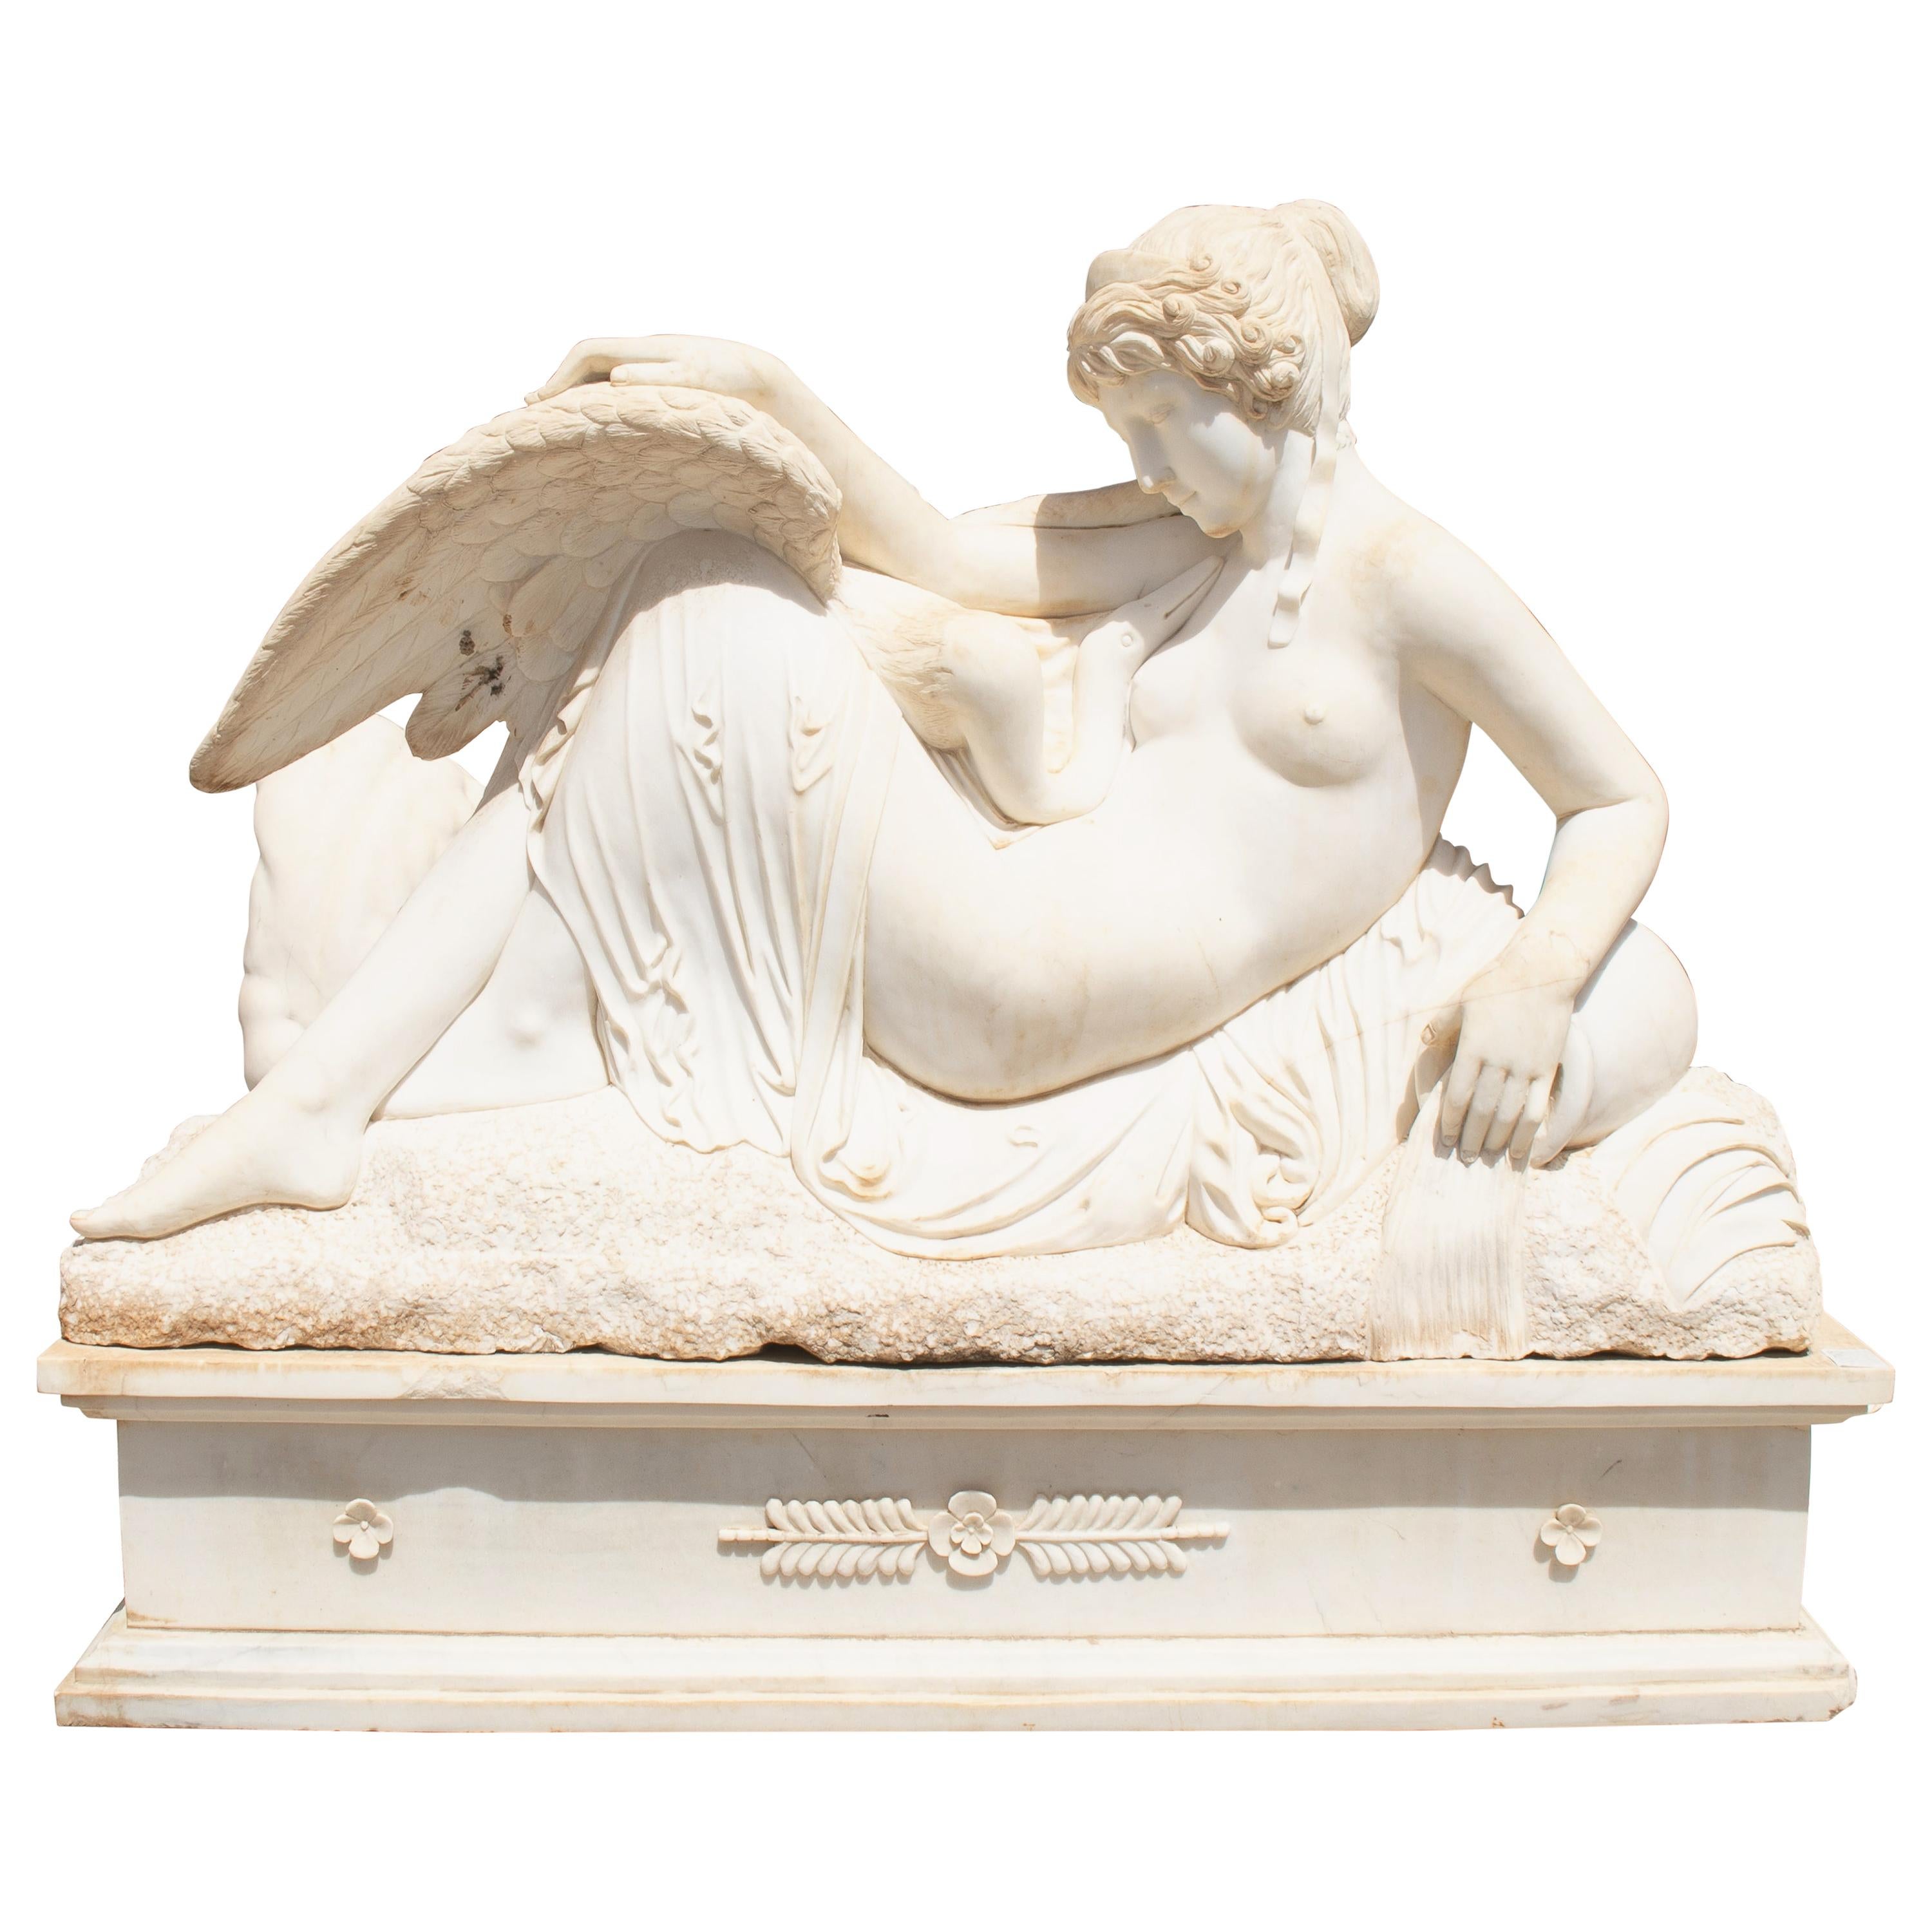 Leda and the Swam Hand Carved Life-Size White Marble Sculptures with Base